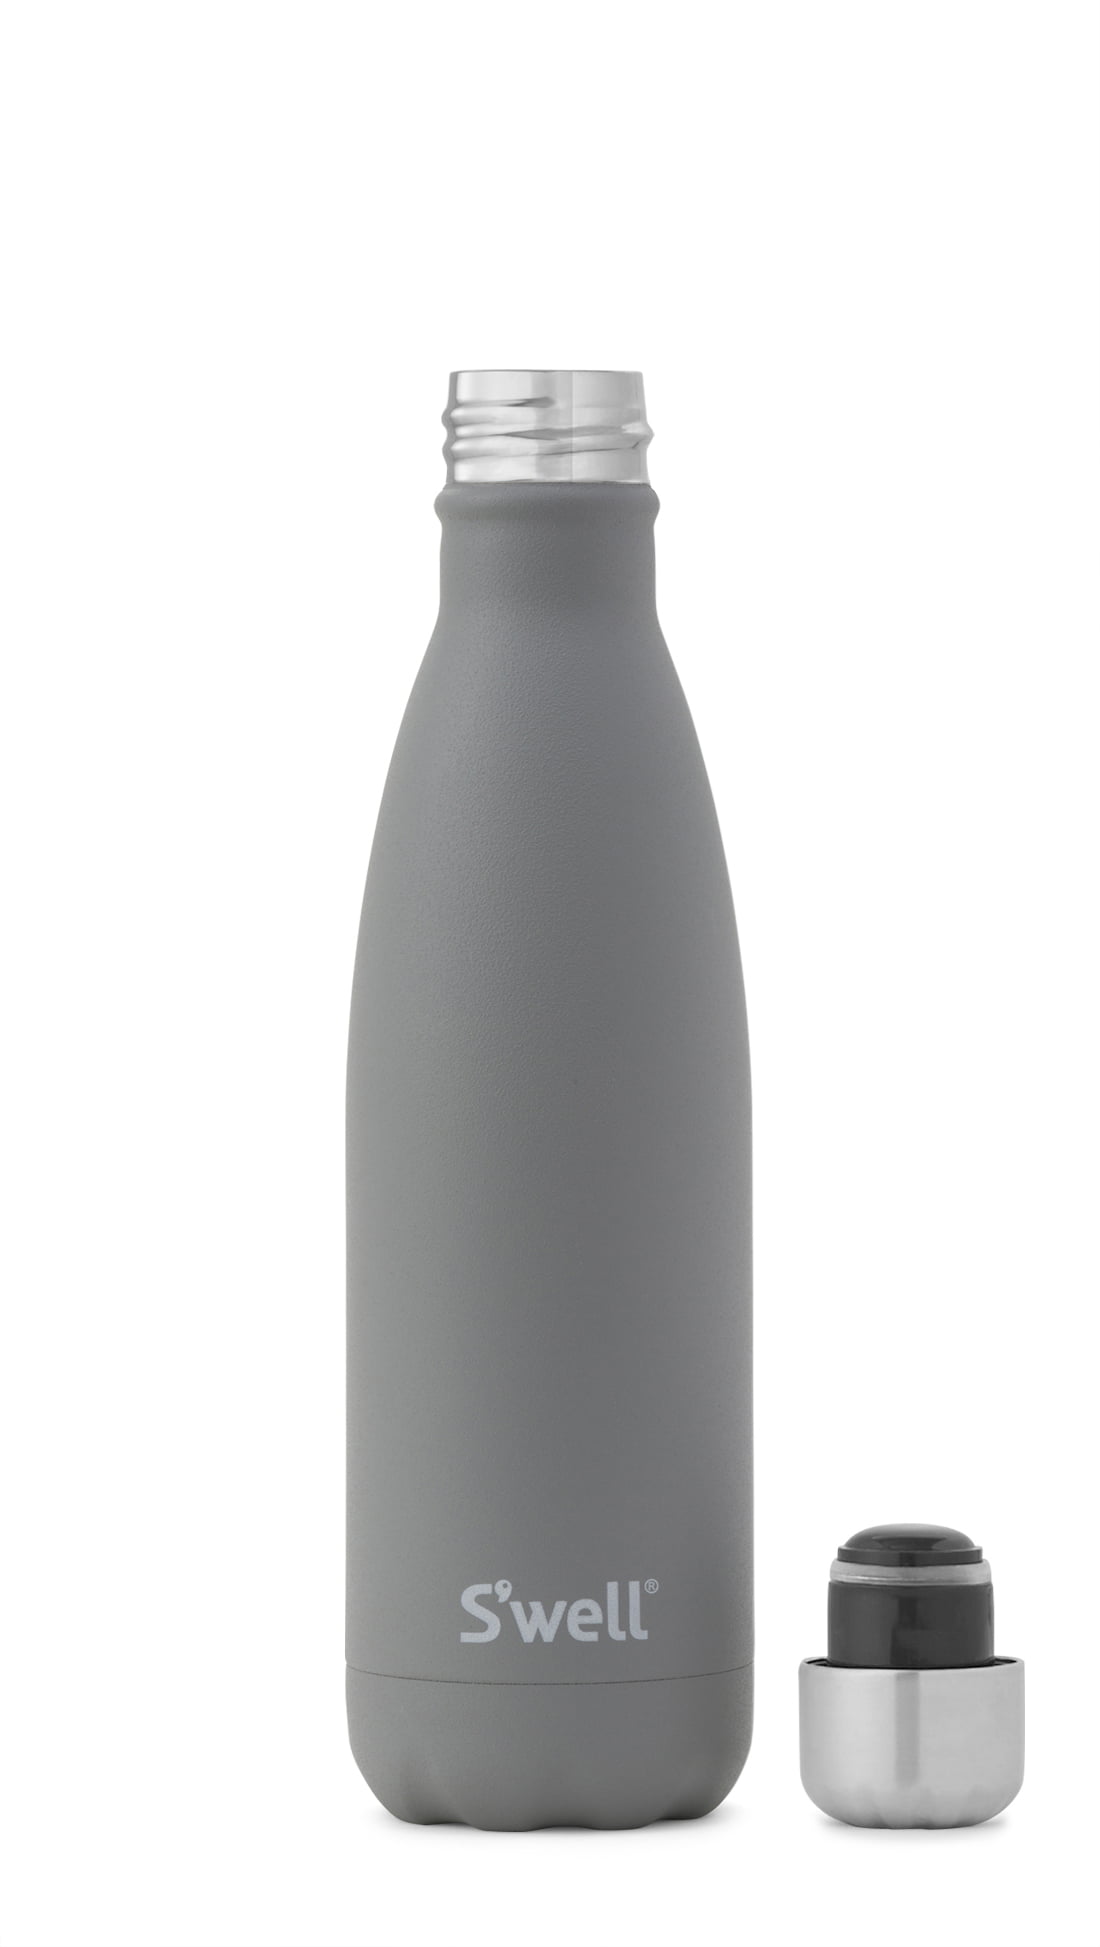 Number 1 Water Bottle Chanel Inspired Insulated Bottles 20oz White — THE  ZEBRA LADY